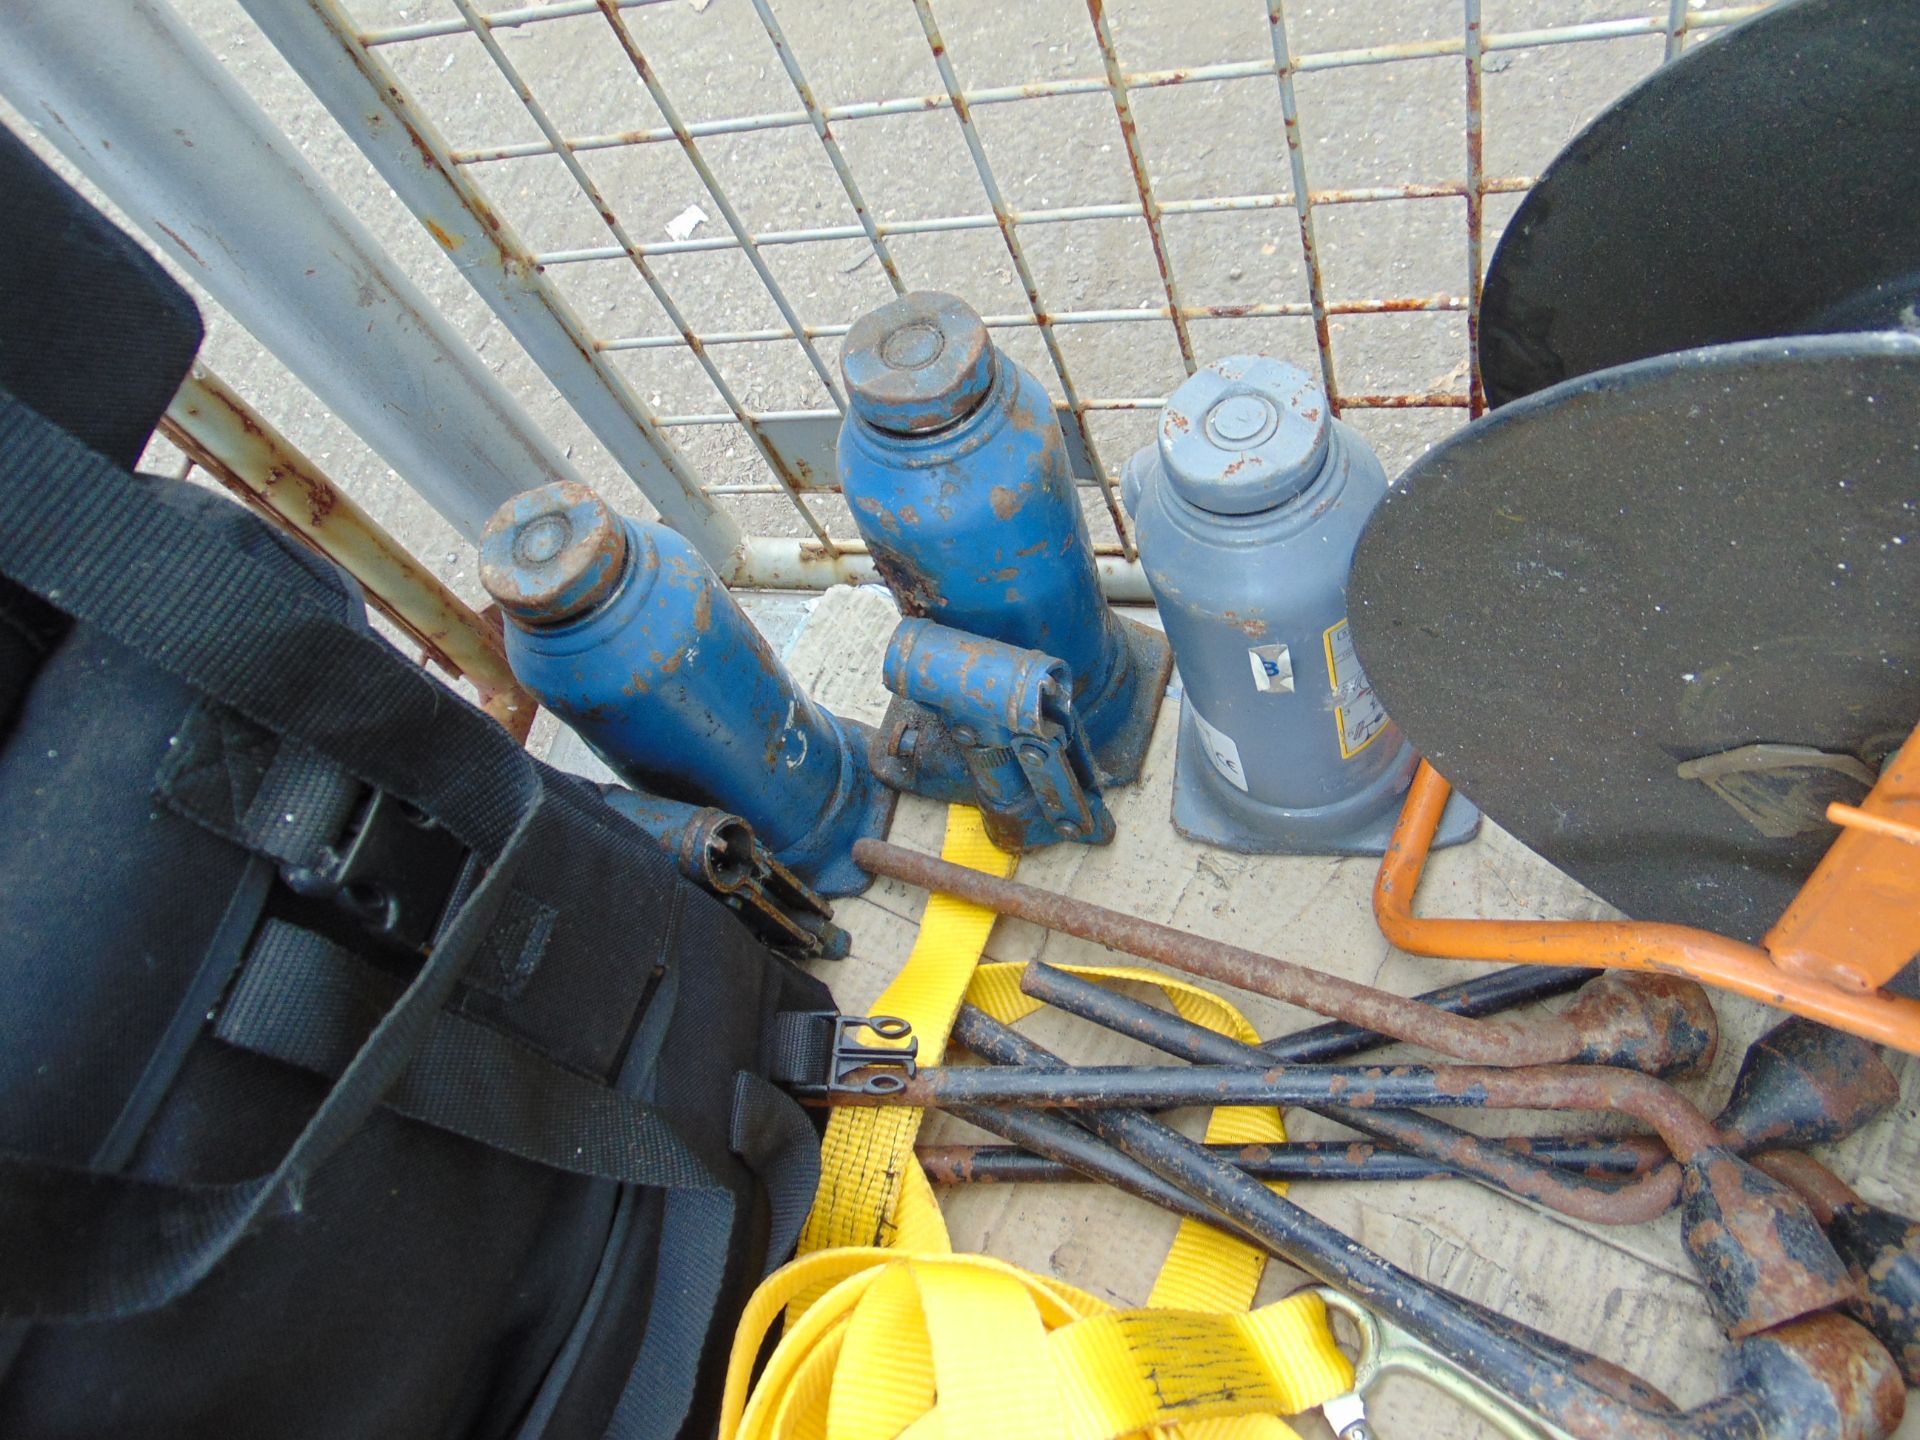 1x Stillage of Electrical Testers, Cable Reels, Jacks, Remote Controls etc - Image 5 of 7